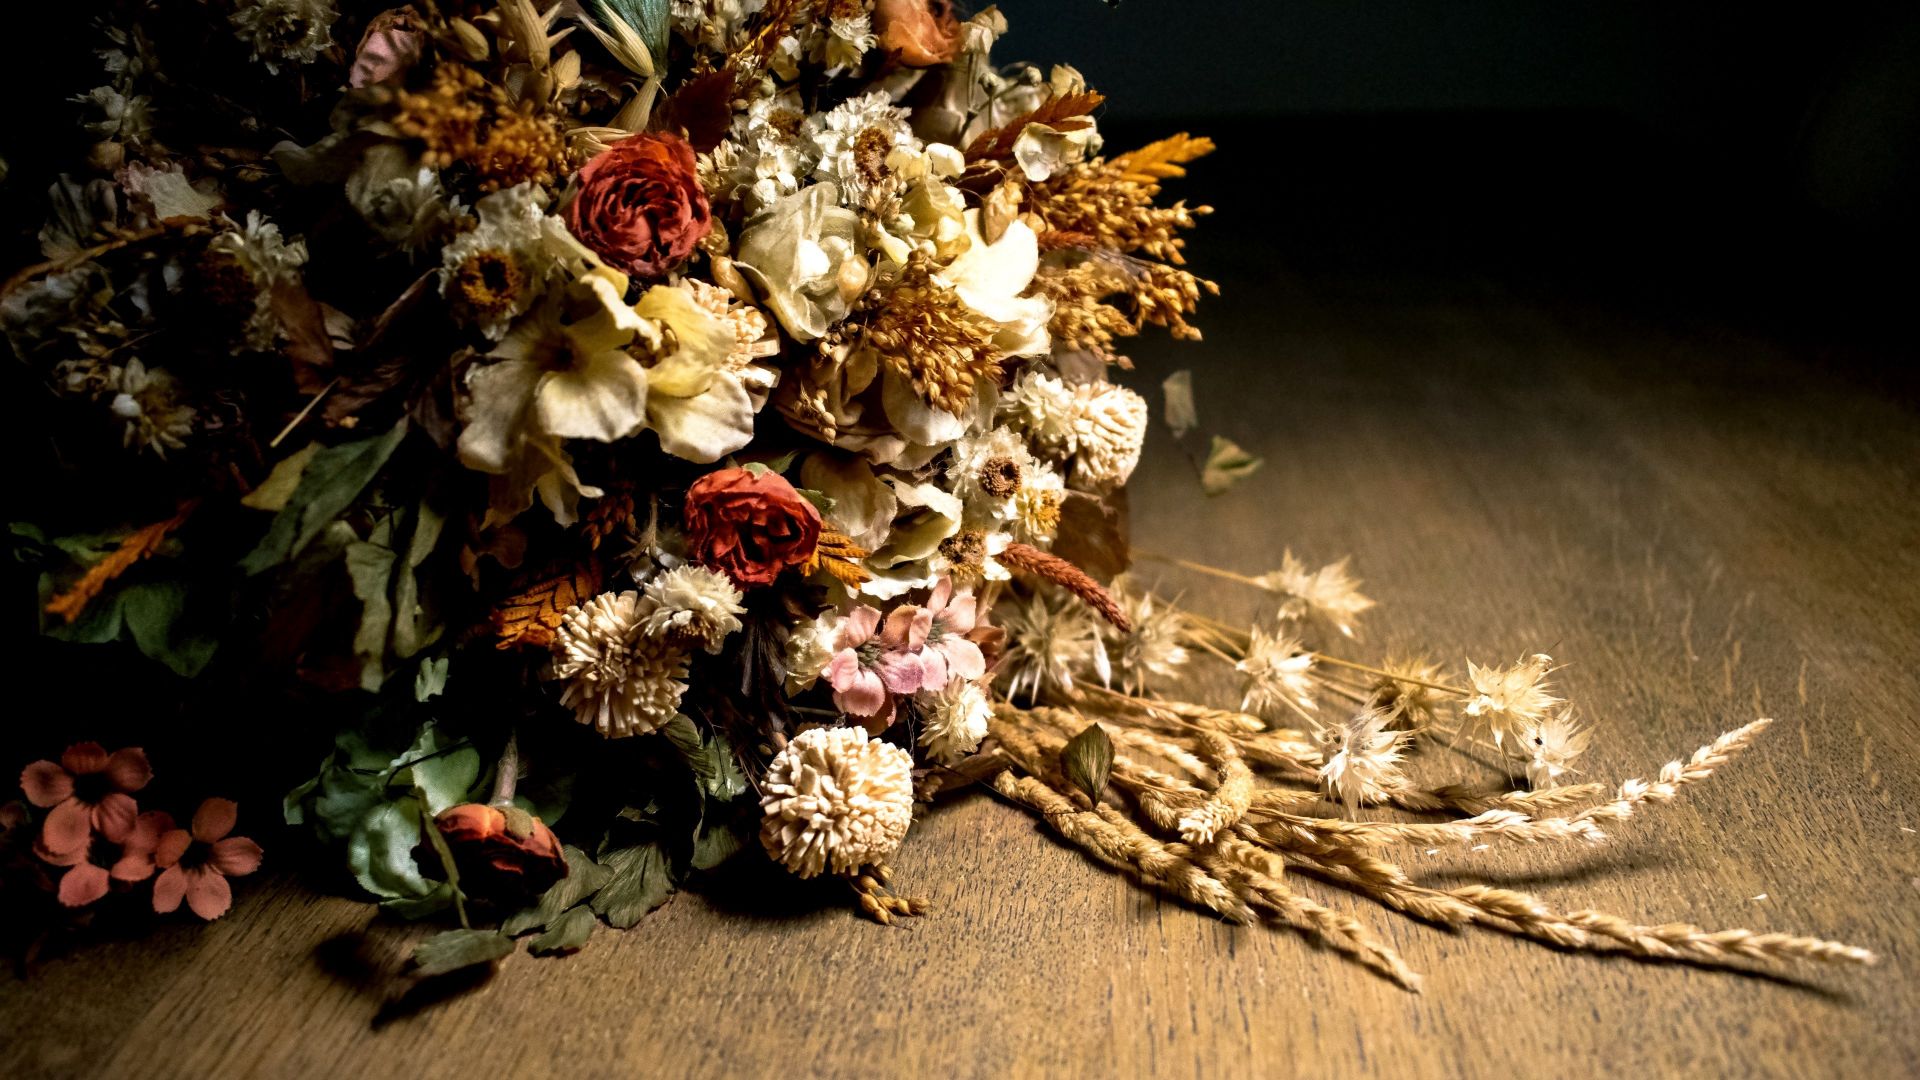 Free download Desktop Wallpaper Bouquet Of Dried Flowers HD Image Picture [1920x1080] for your Desktop, Mobile & Tablet. Explore Dried Flowers Desktop Wallpaper. Wallpaper Flowers, Background Flowers, Flowers Background